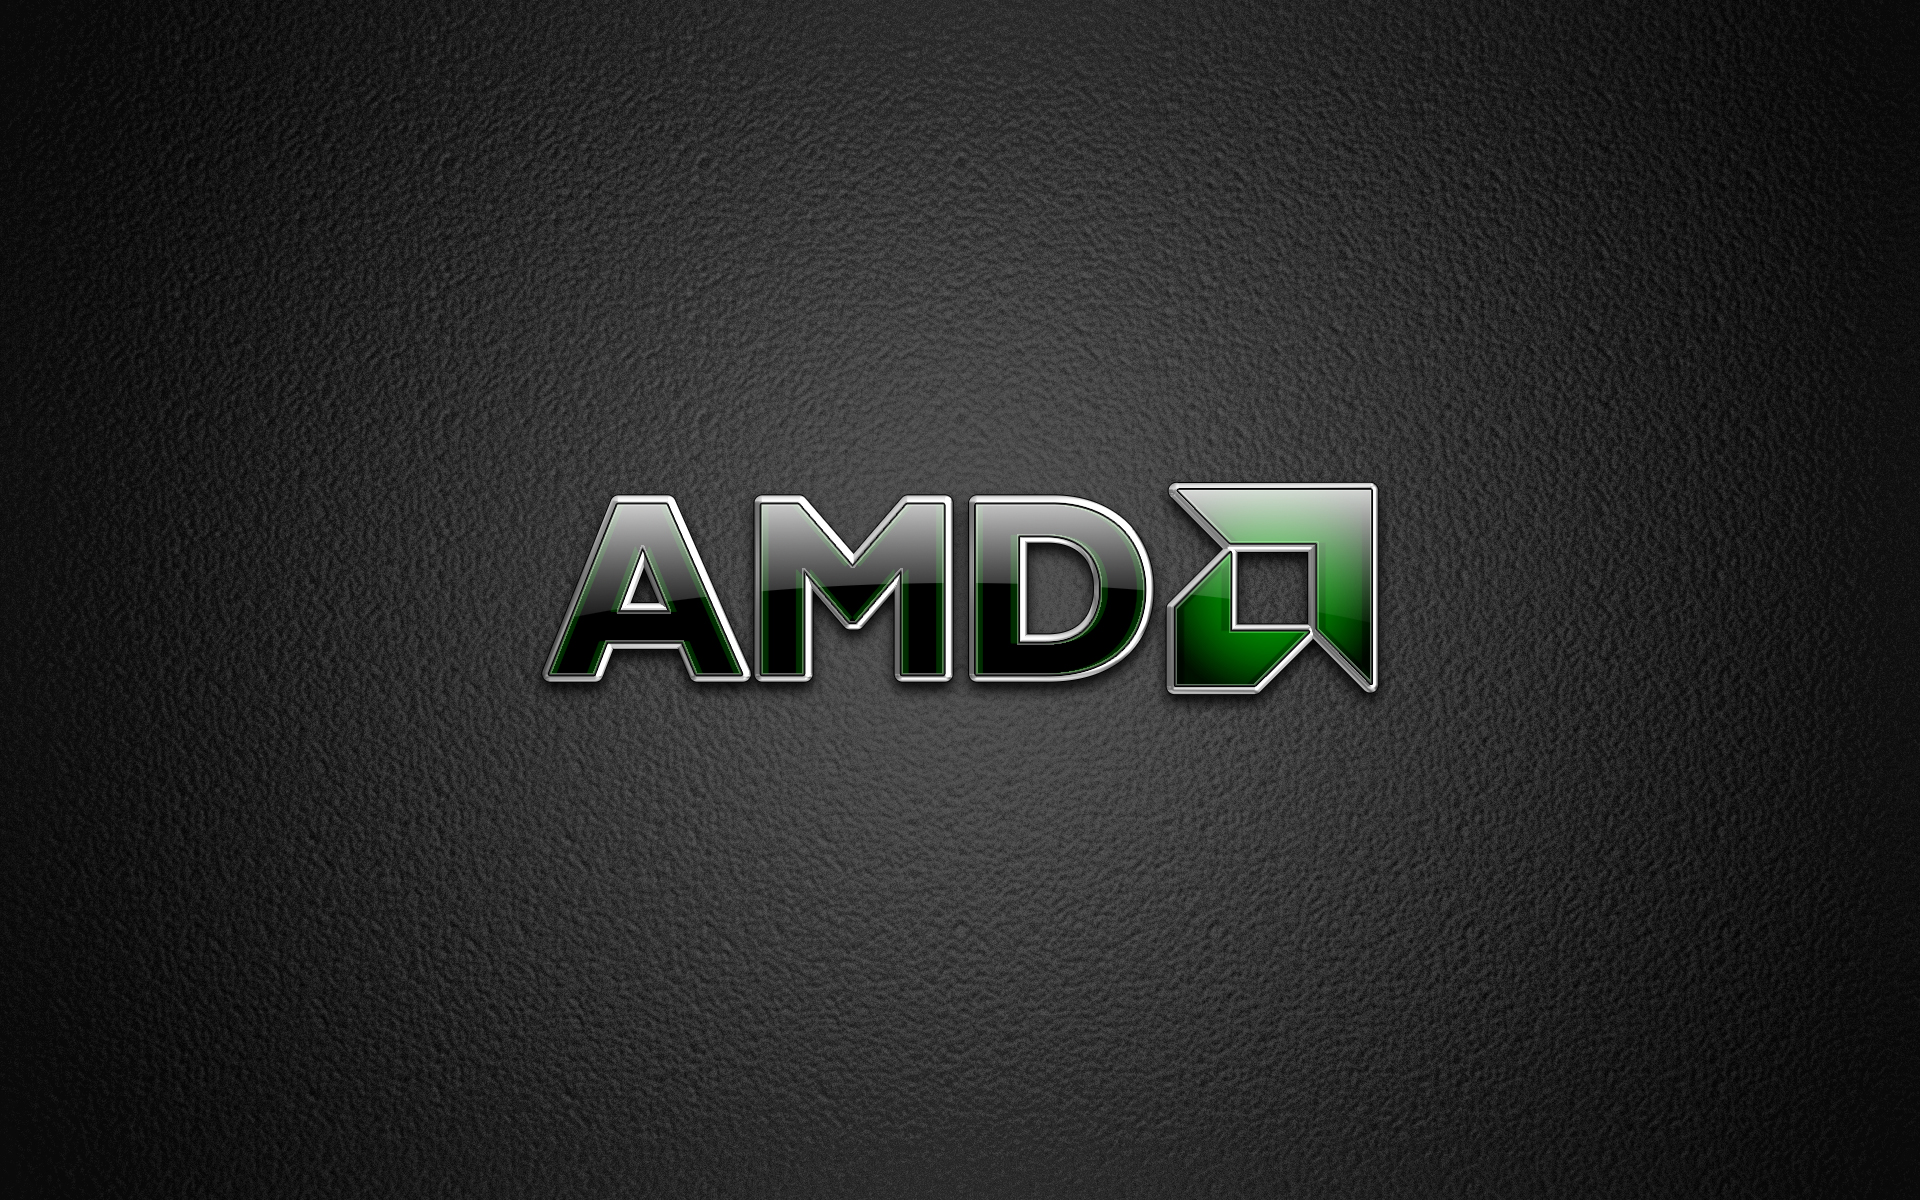 Amd Microsoft Getting Back To Their Roots With Windows